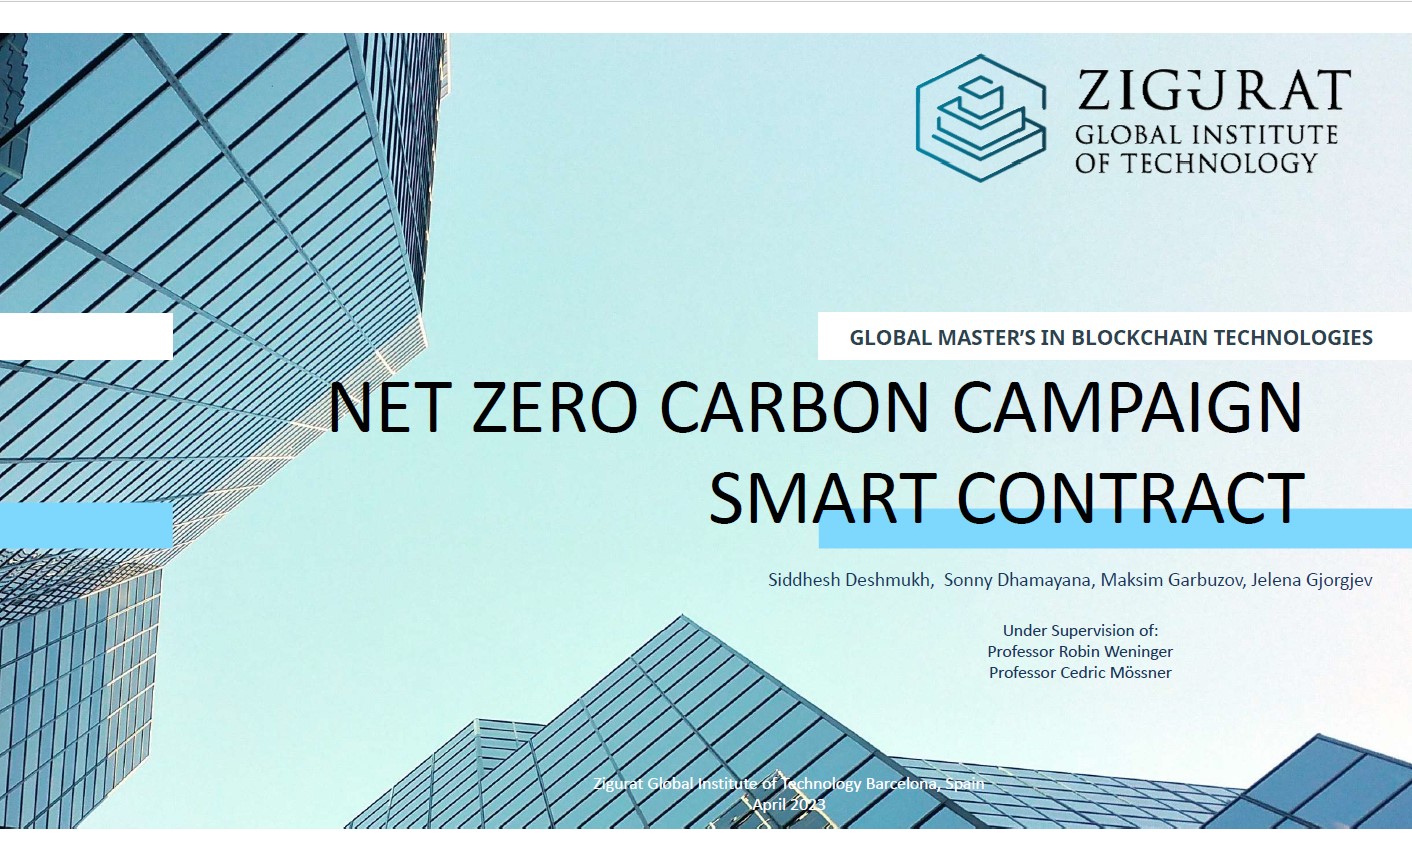 Net Zero Carbon Campaign Smart Contract For Information Communication Technology Sectors to Achieve Net Zero Targets Through Science Based Target Initiatives Approached